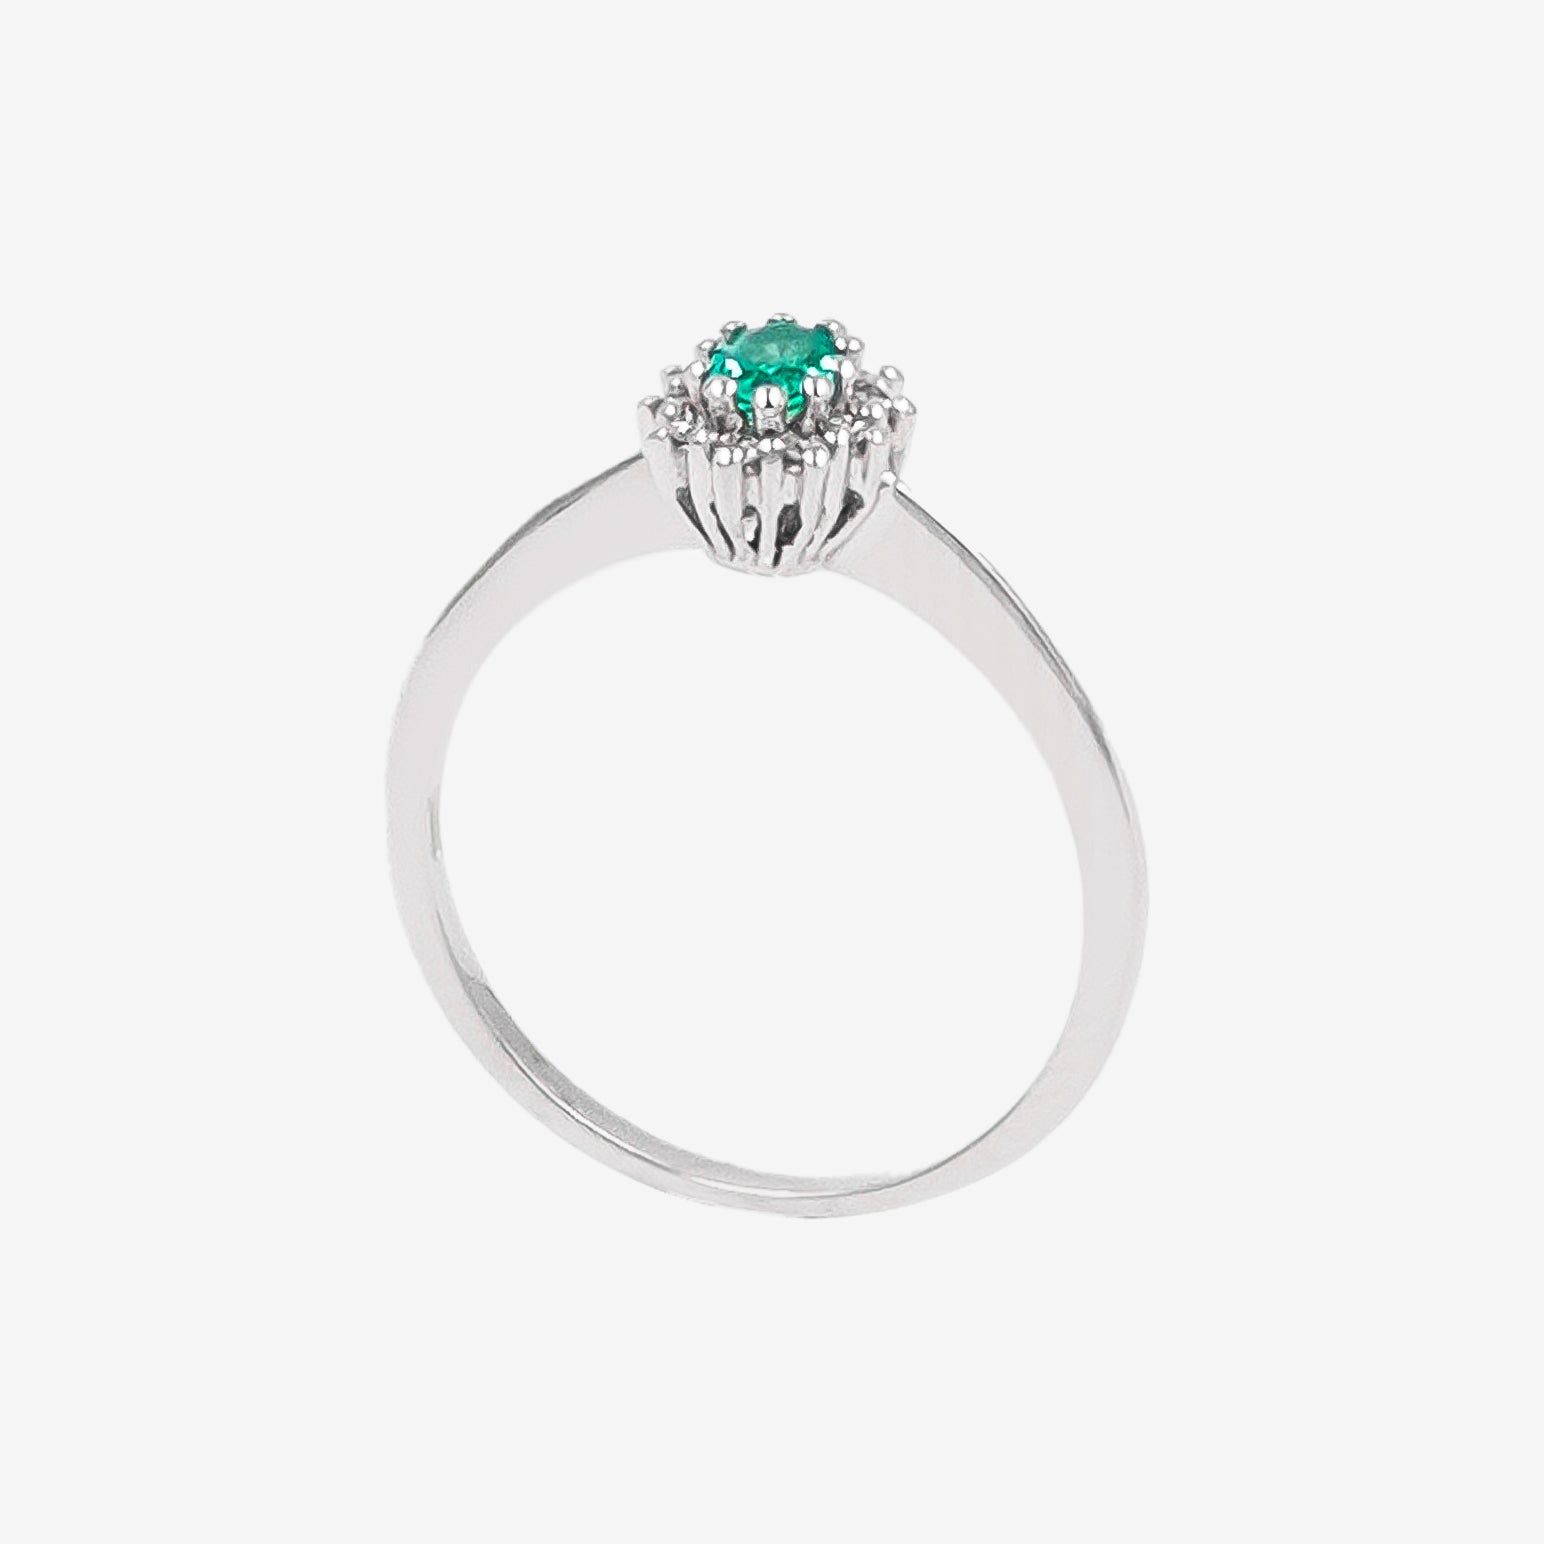 Emerald Sparkle Ring with Diamonds